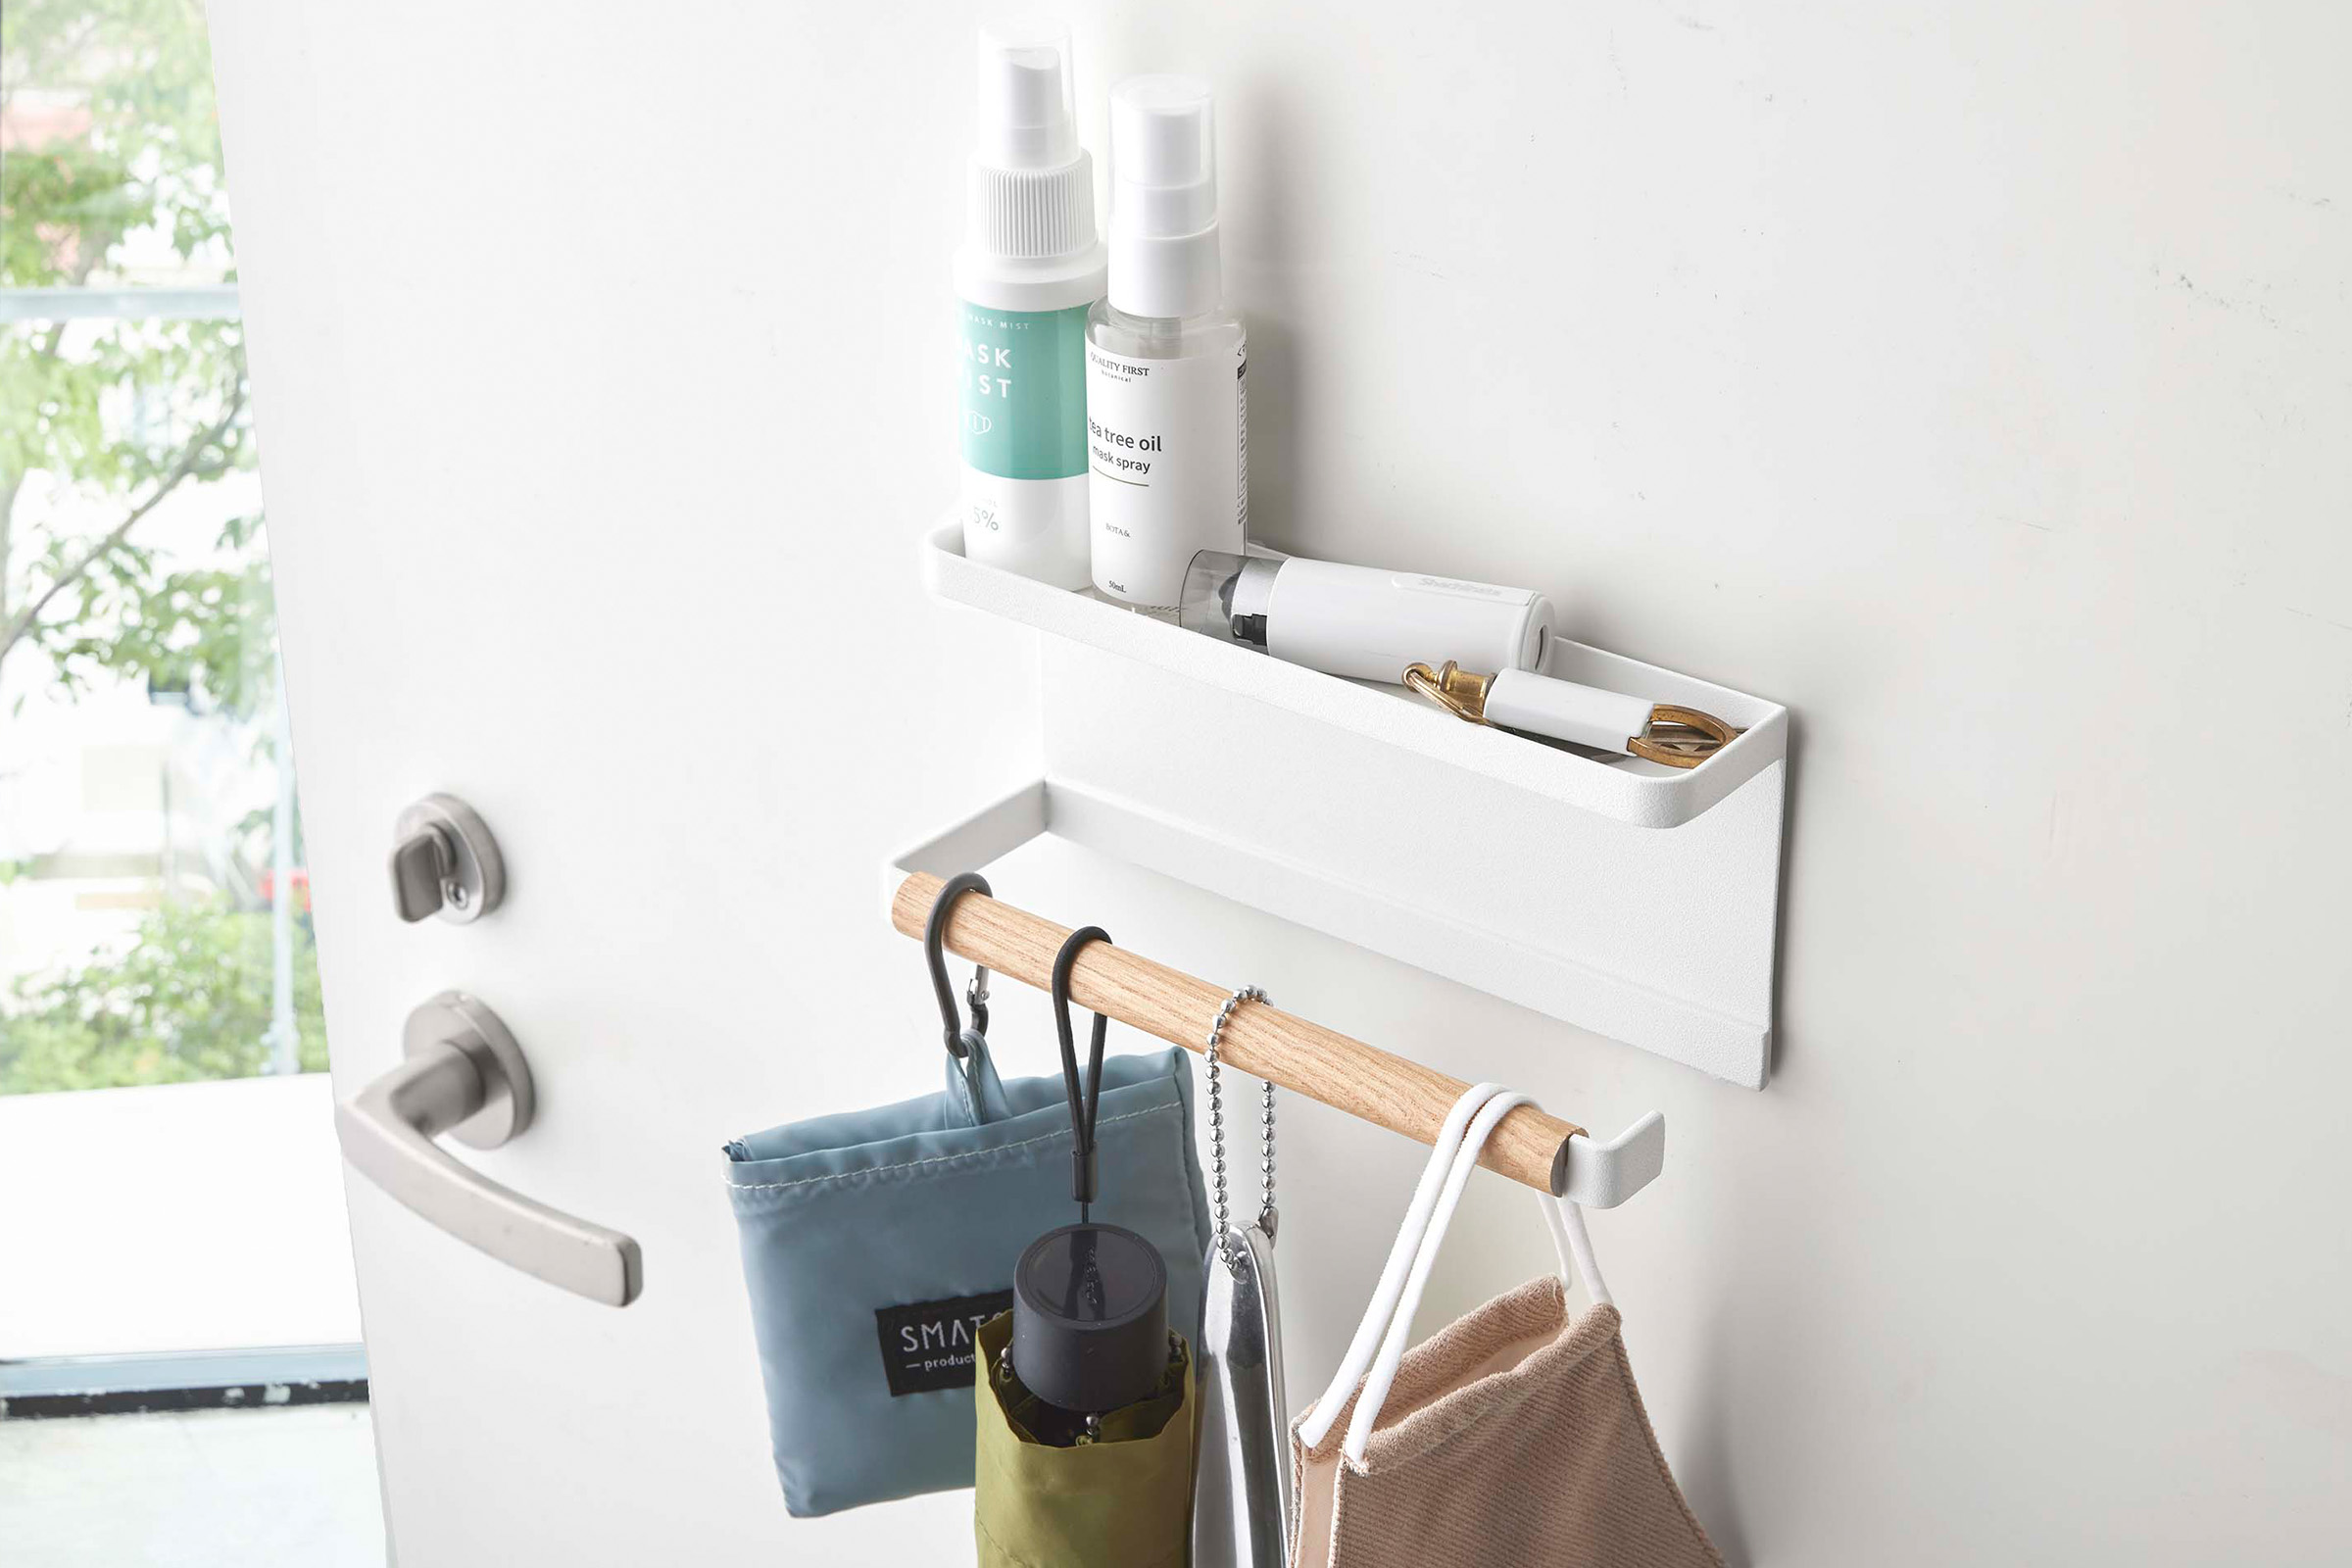 Magnetic Umbrella Holder by Yamazaki Home mounted on a door holding masks, hand sanitizer sprays, and other entryway items.